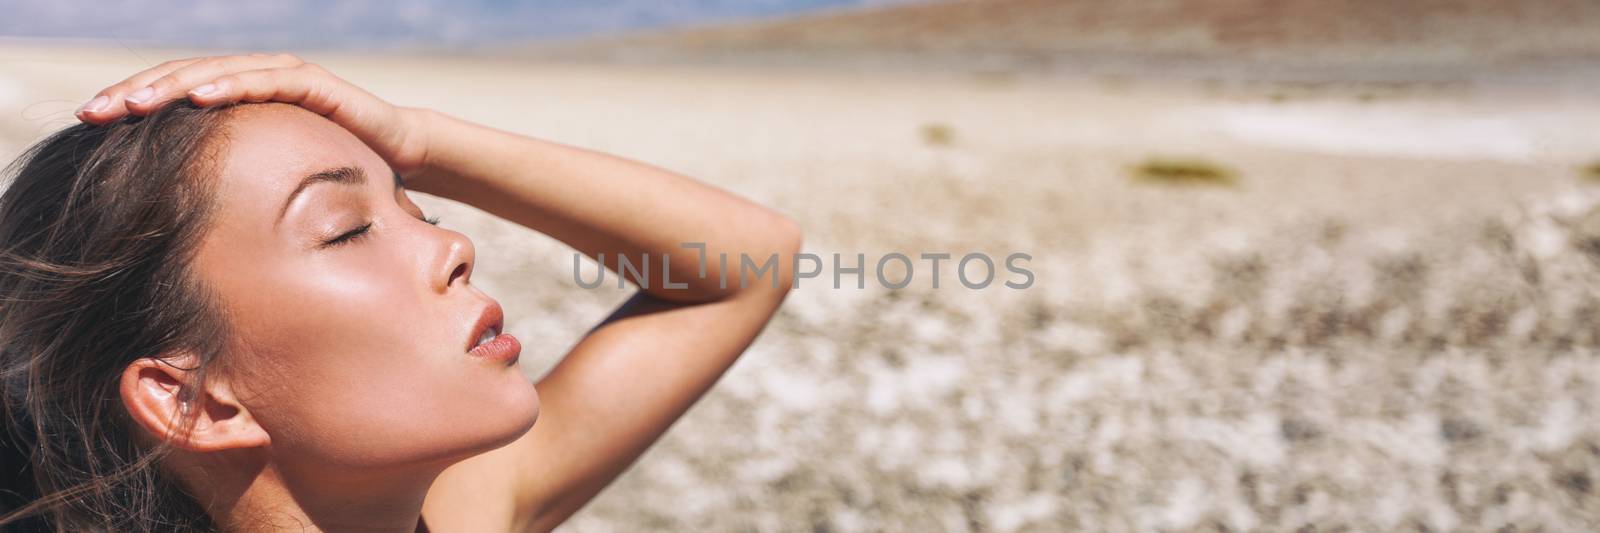 Heat stroke dehydrated girl in the desert sun hot temperature summer weather danger. Panoramic banner landscape with Asian woman tired sweating exhausted.